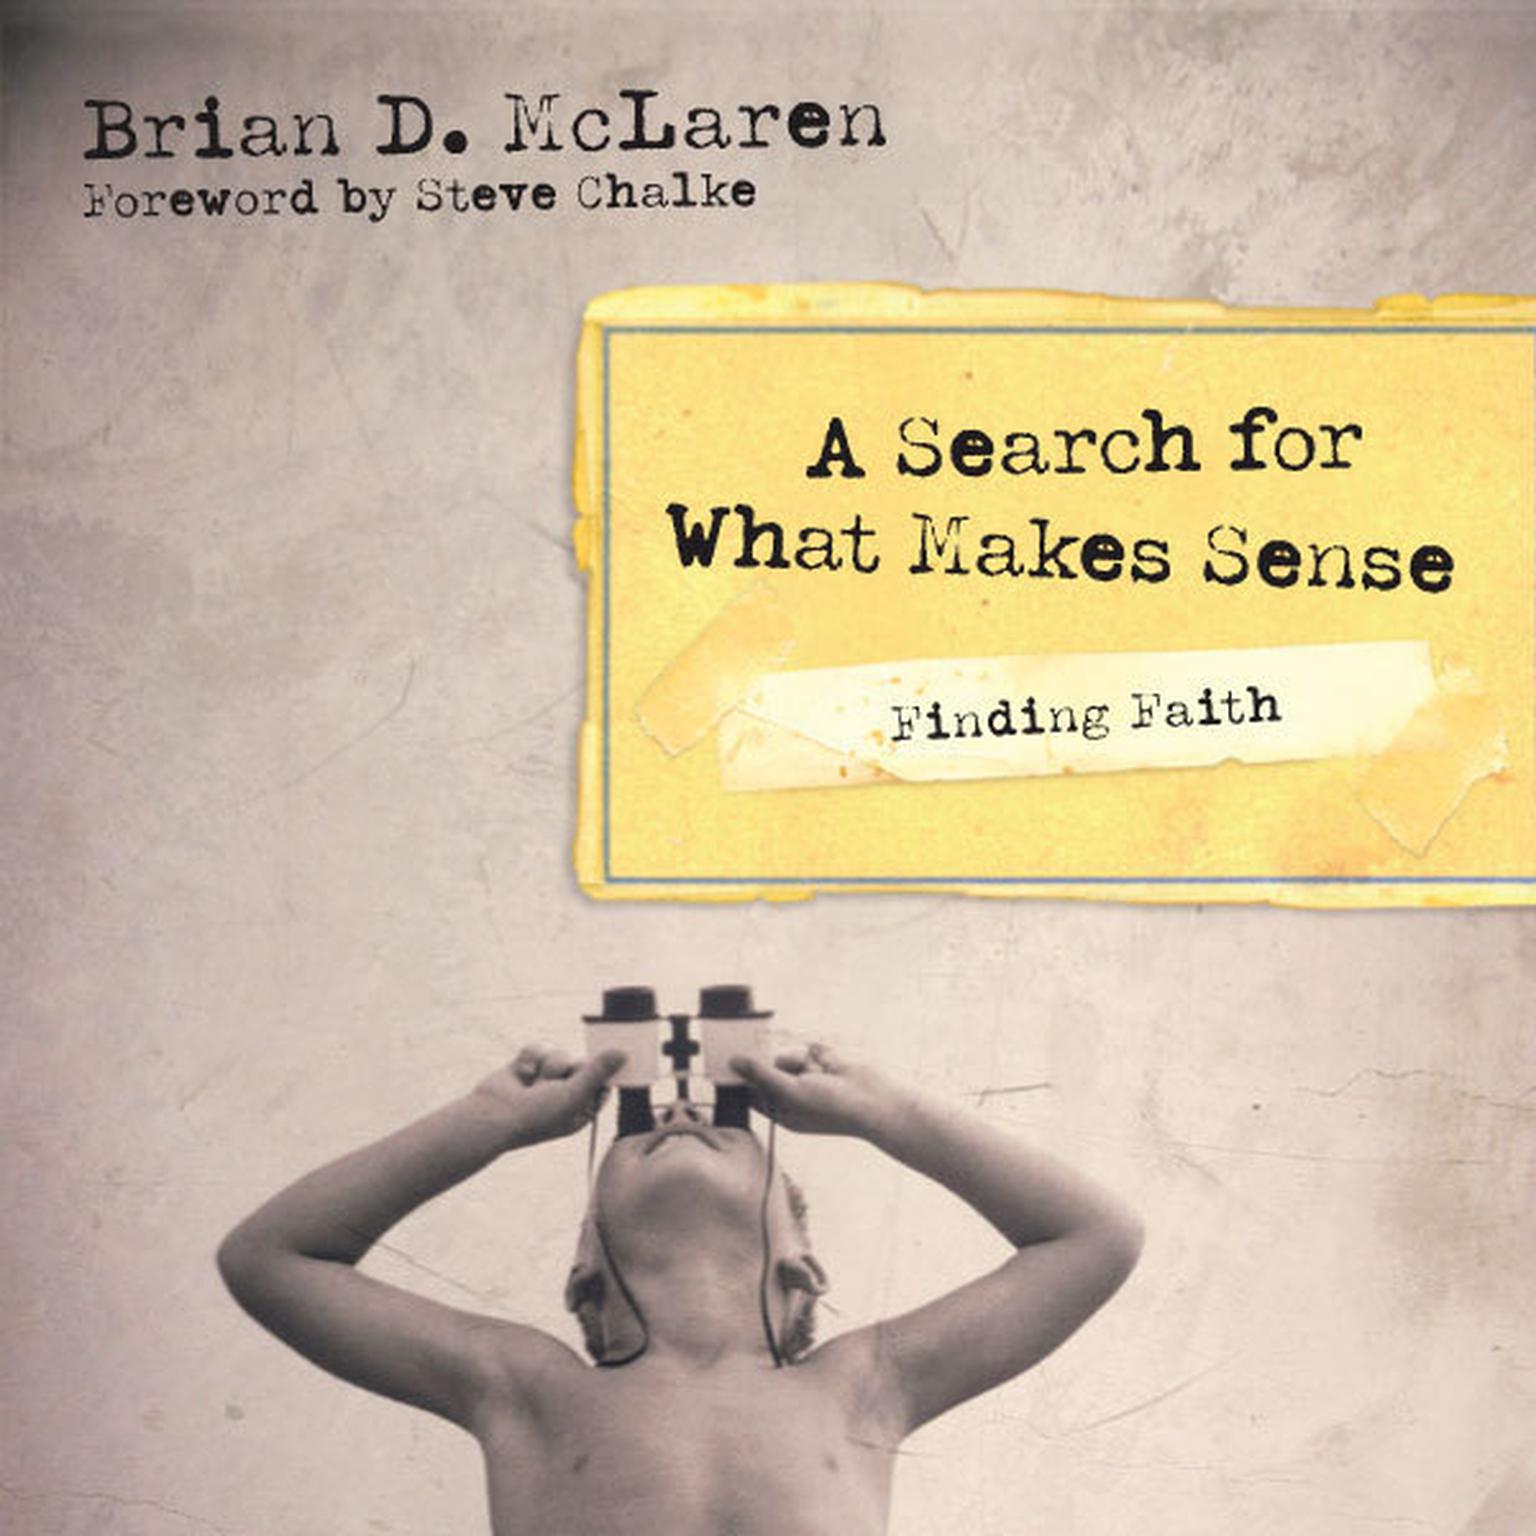 Finding Faith---A Search for What Makes Sense: A Search for What Makes Sense Audiobook, by Brian D. McLaren